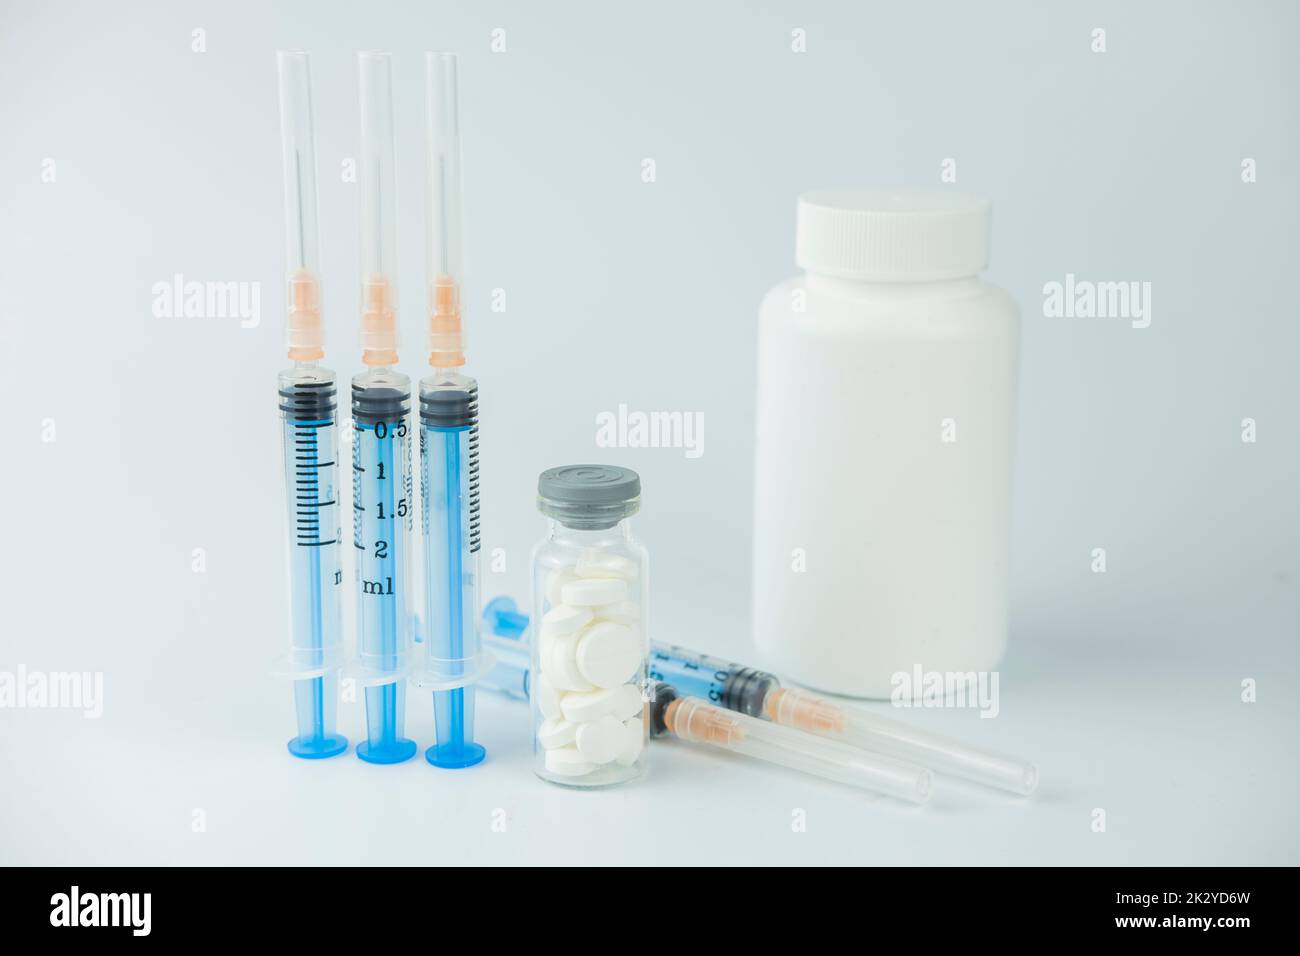 jar white packaging with medicines pills in medicine for treatment on a simple background Stock Photo